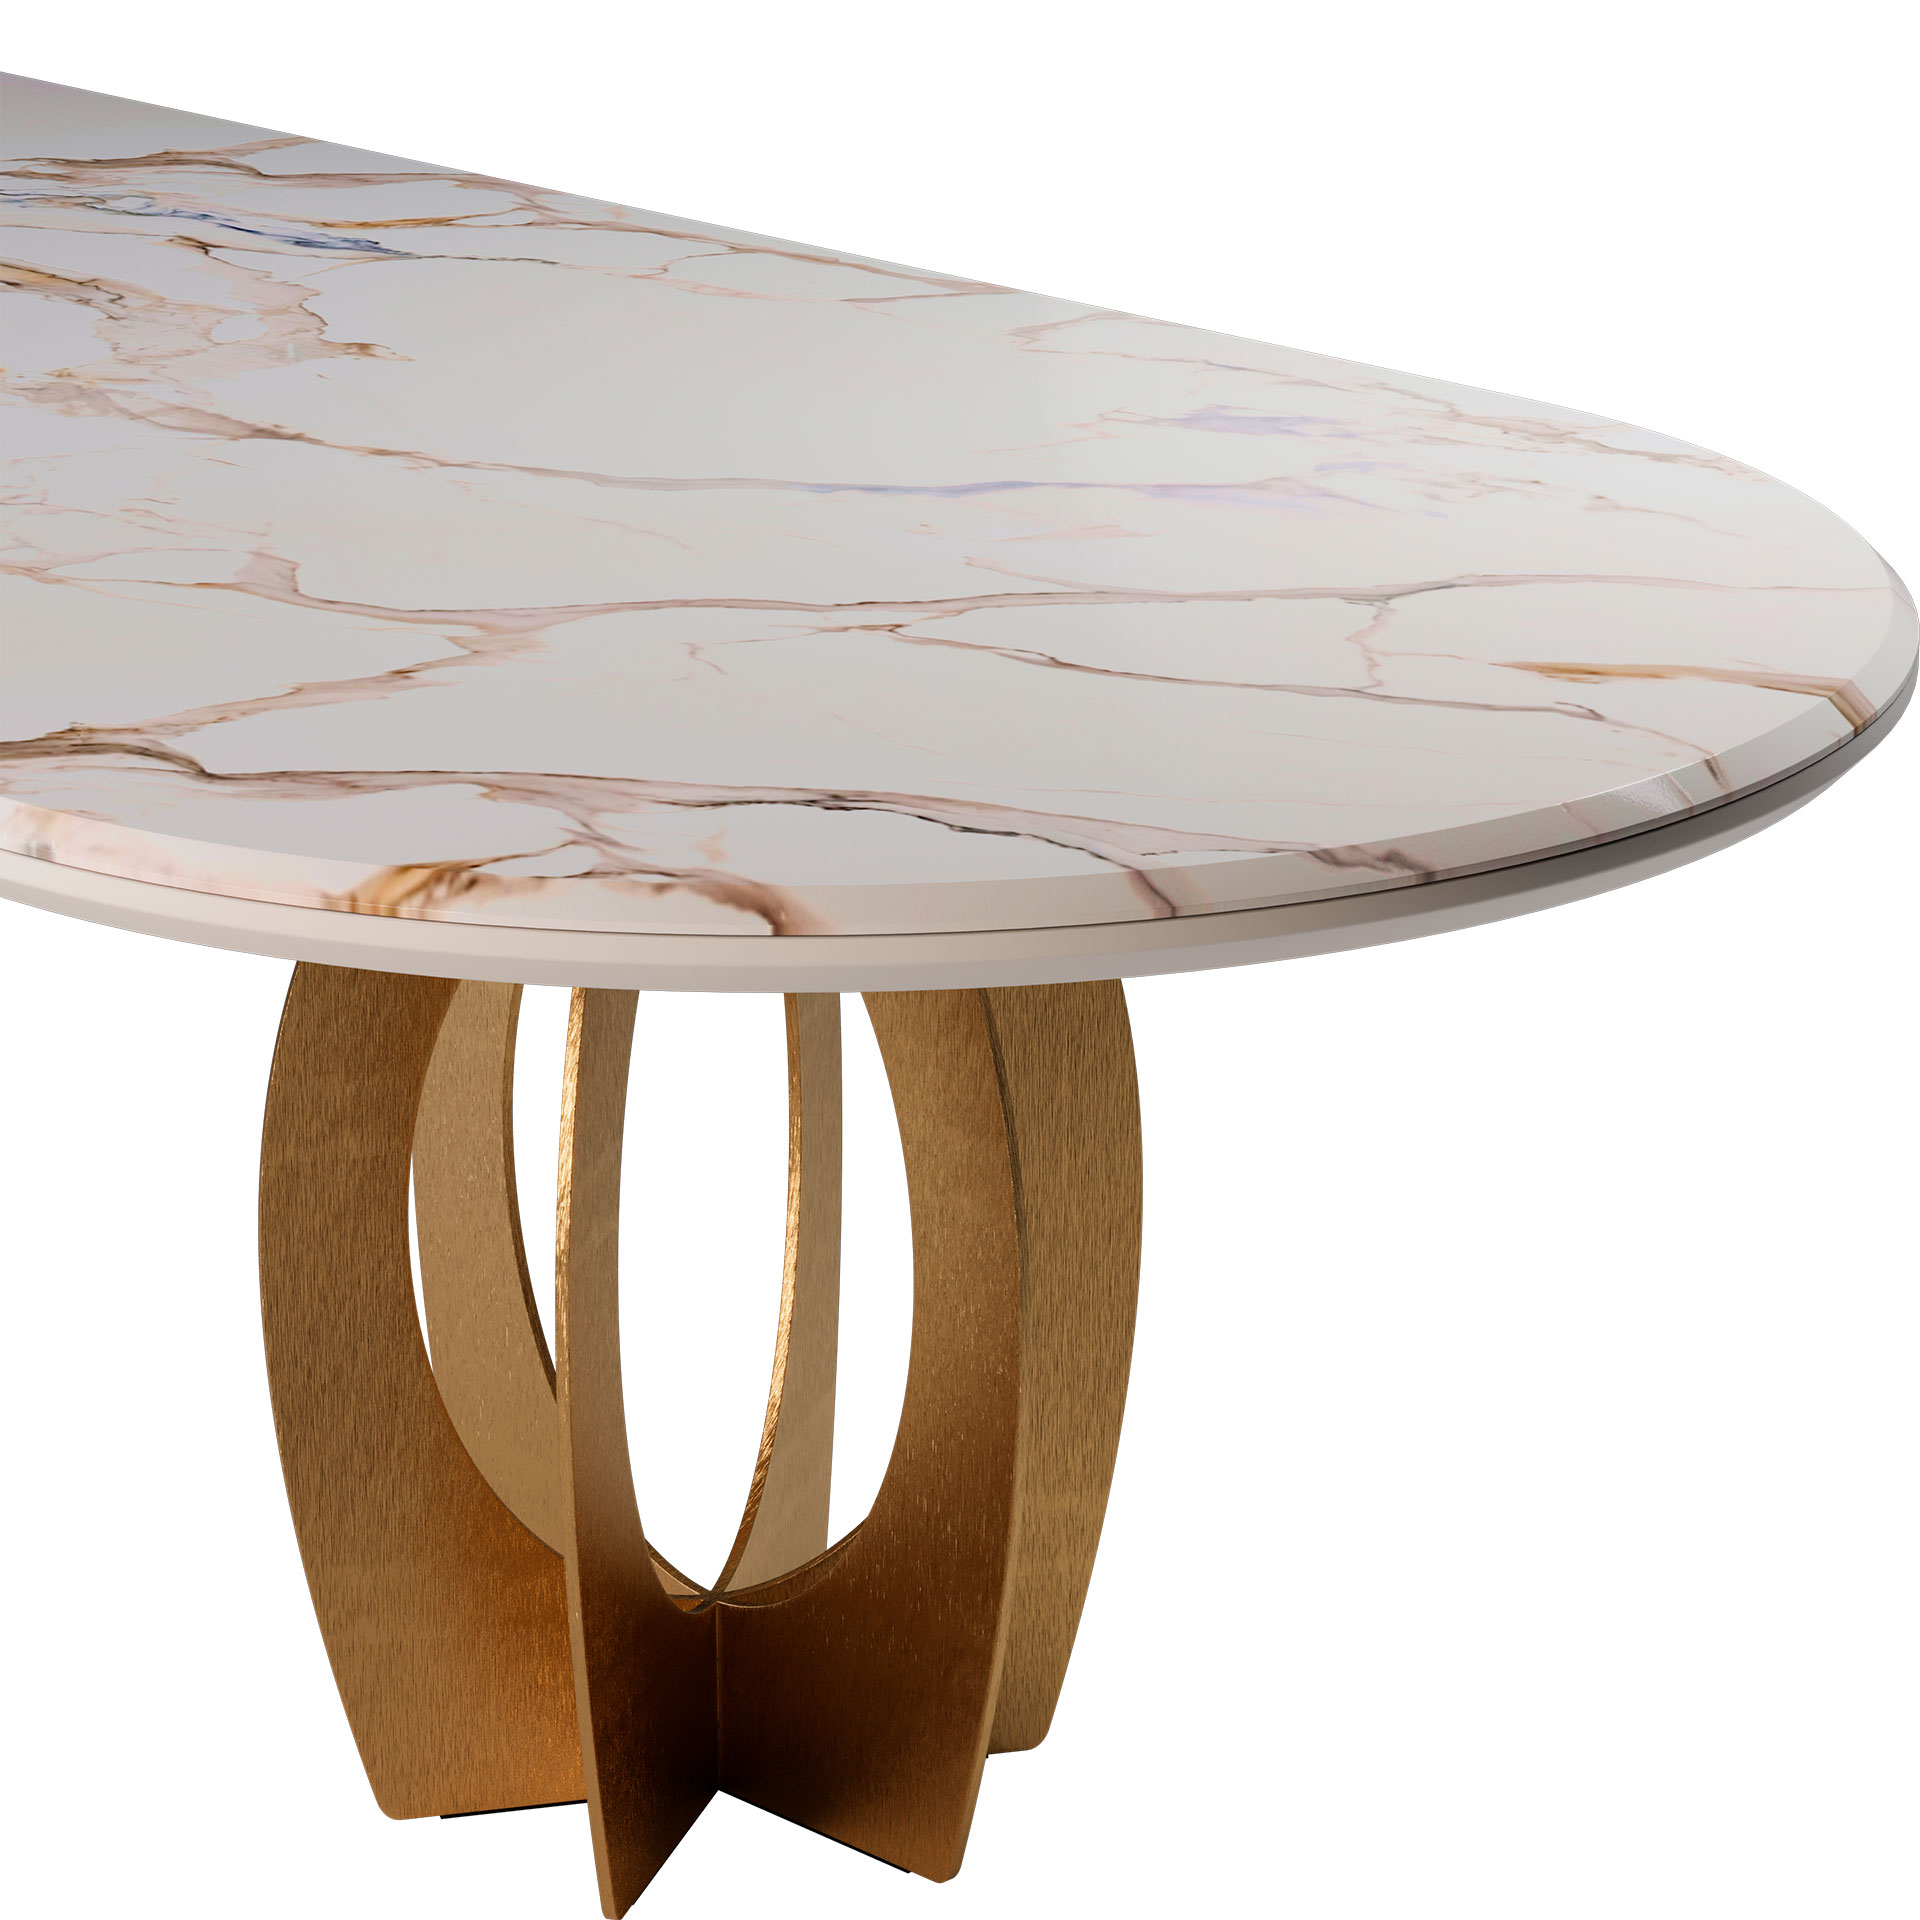 Boulder oval dining table